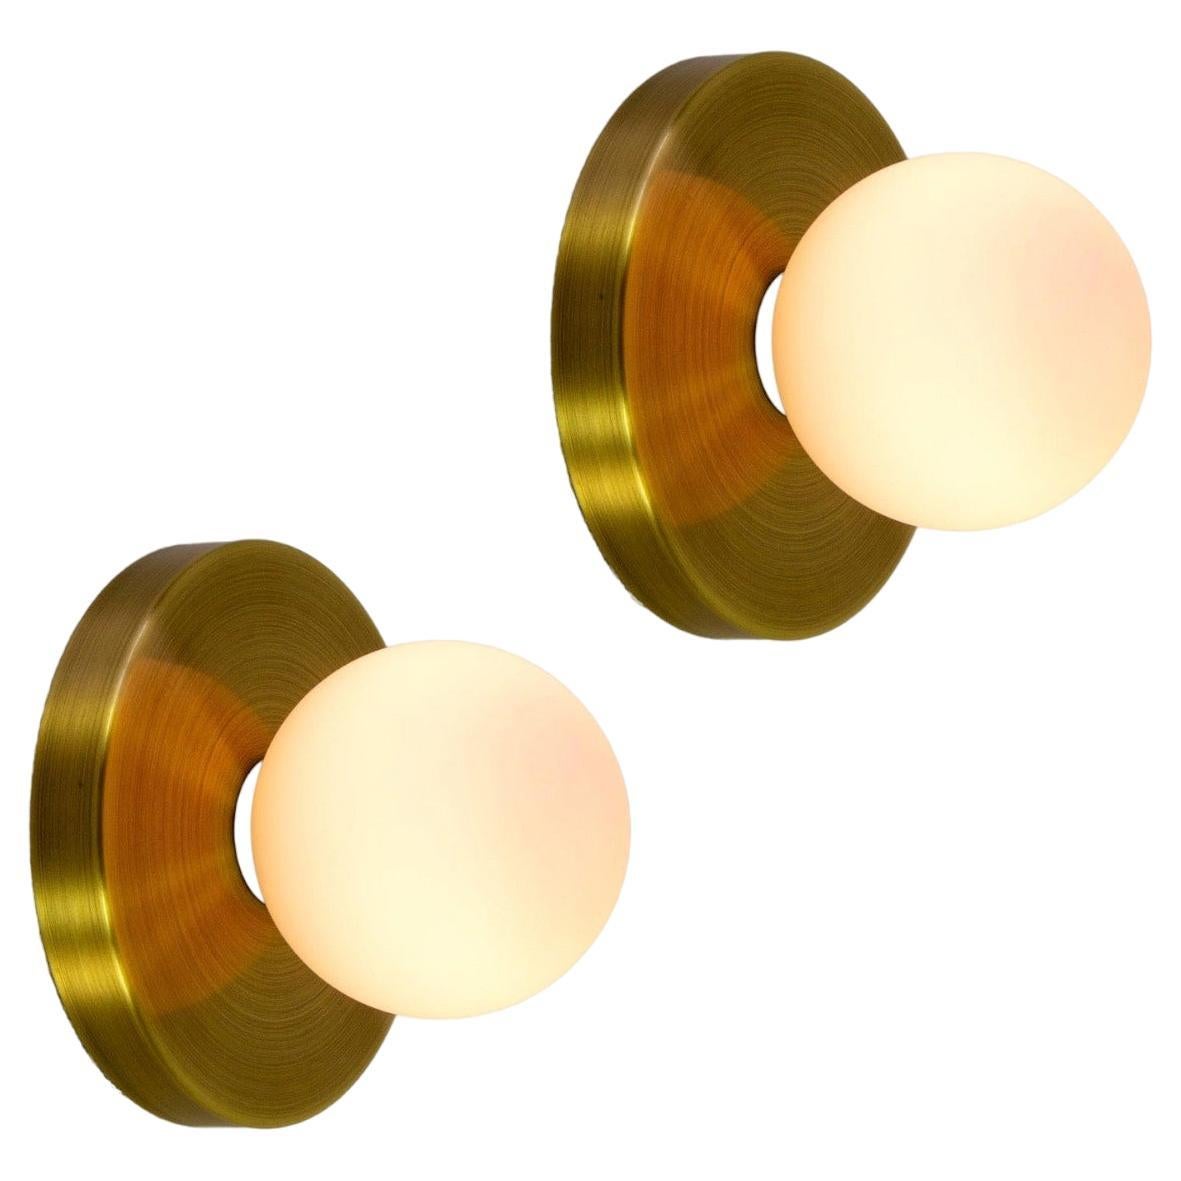 Pair of Globe Sconces by Research.Lighting, Brushed Brass, Made to Order